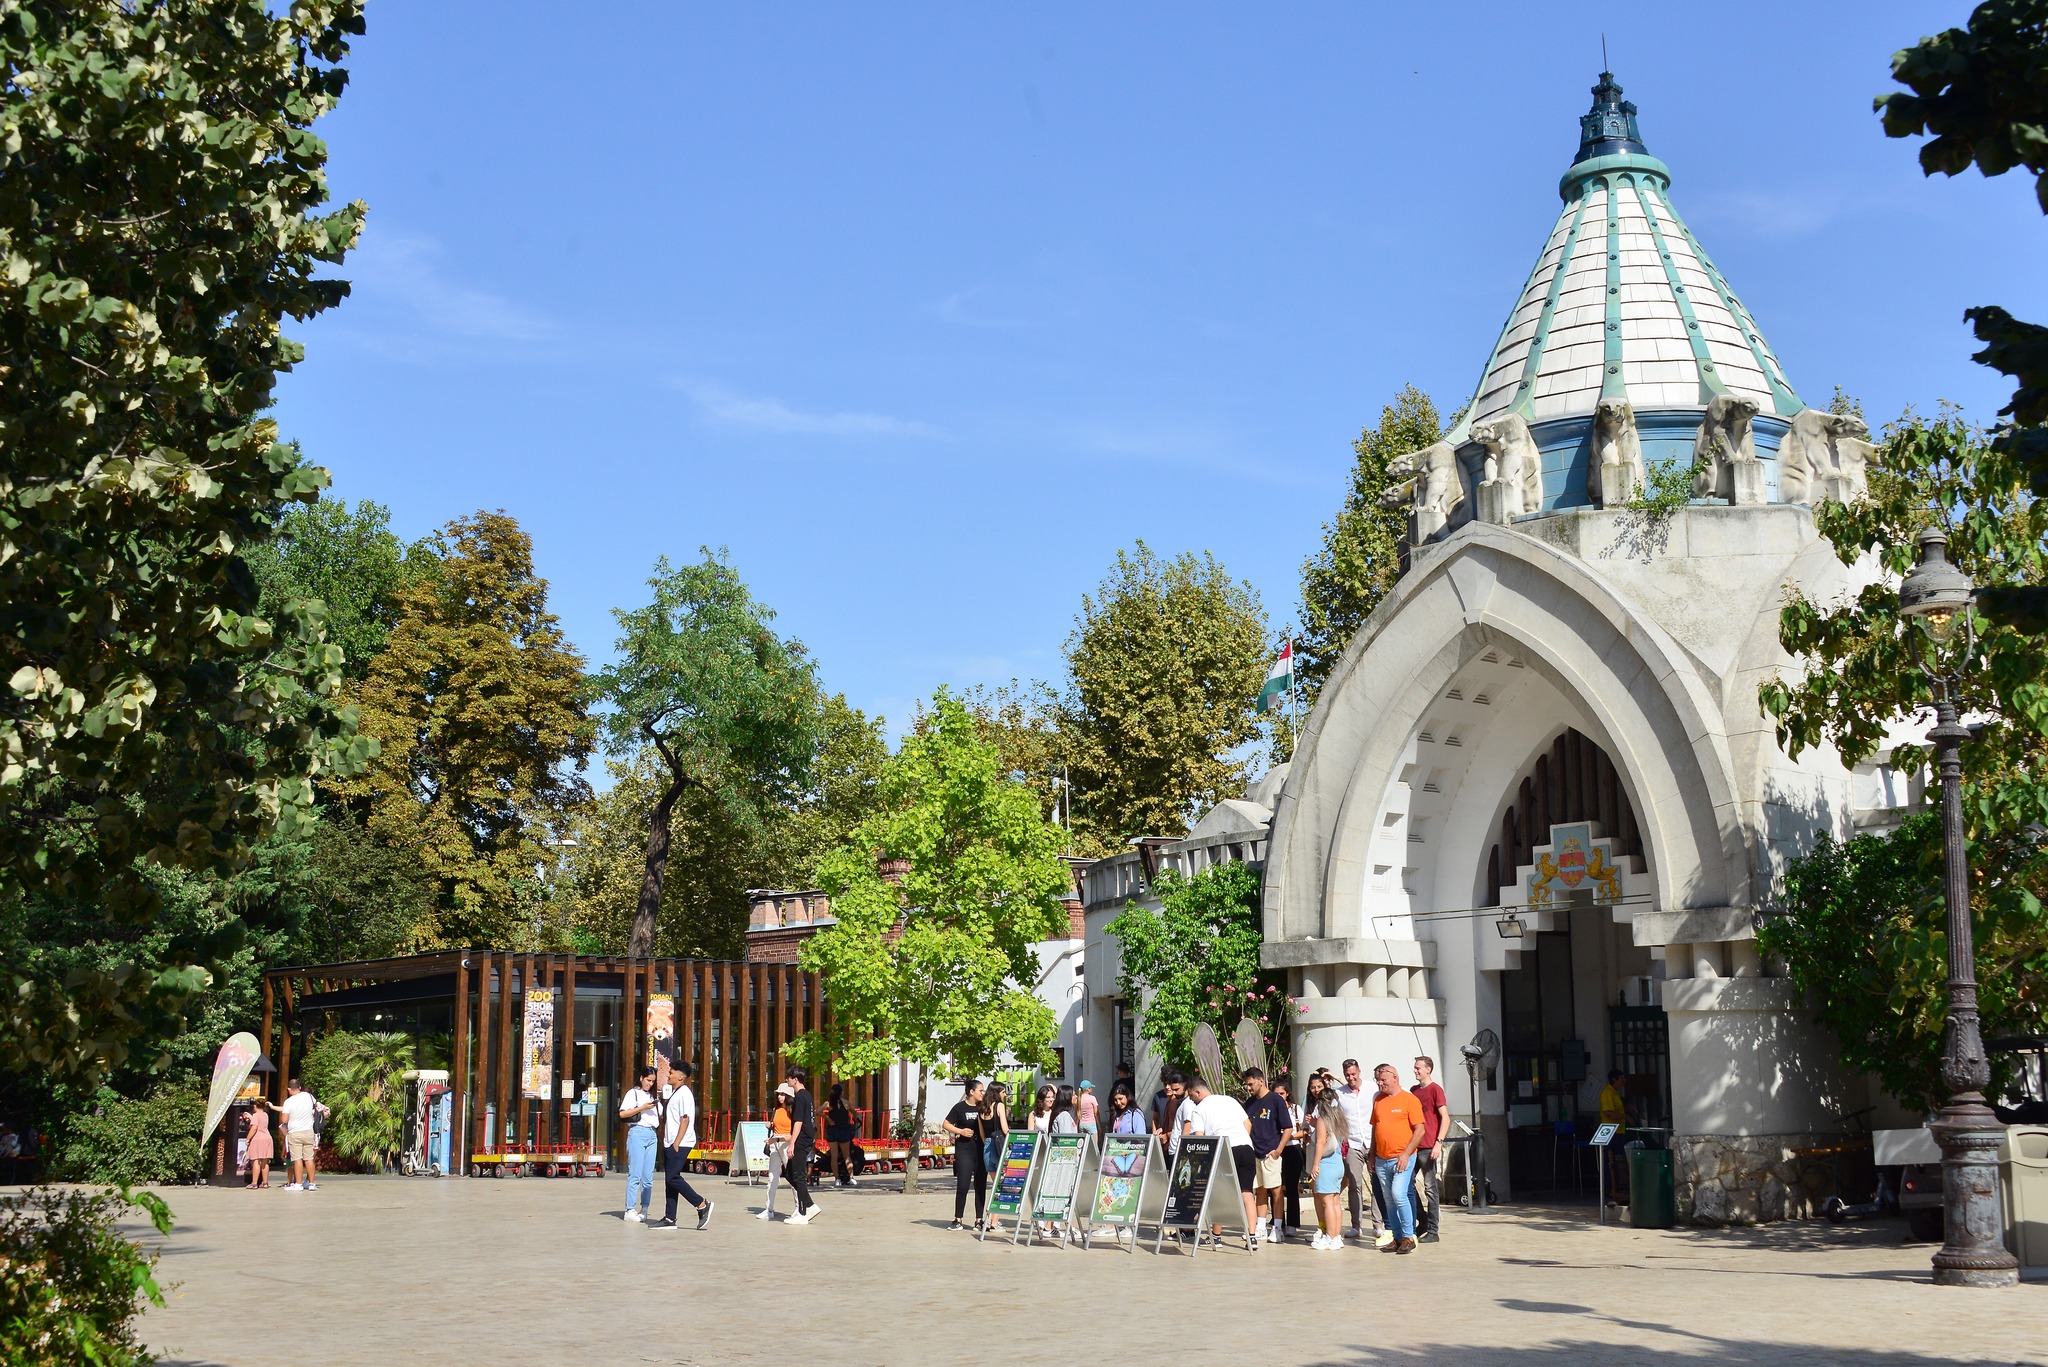 Budapest Zoo Increasingly Popular, Visitor Numbers Growing